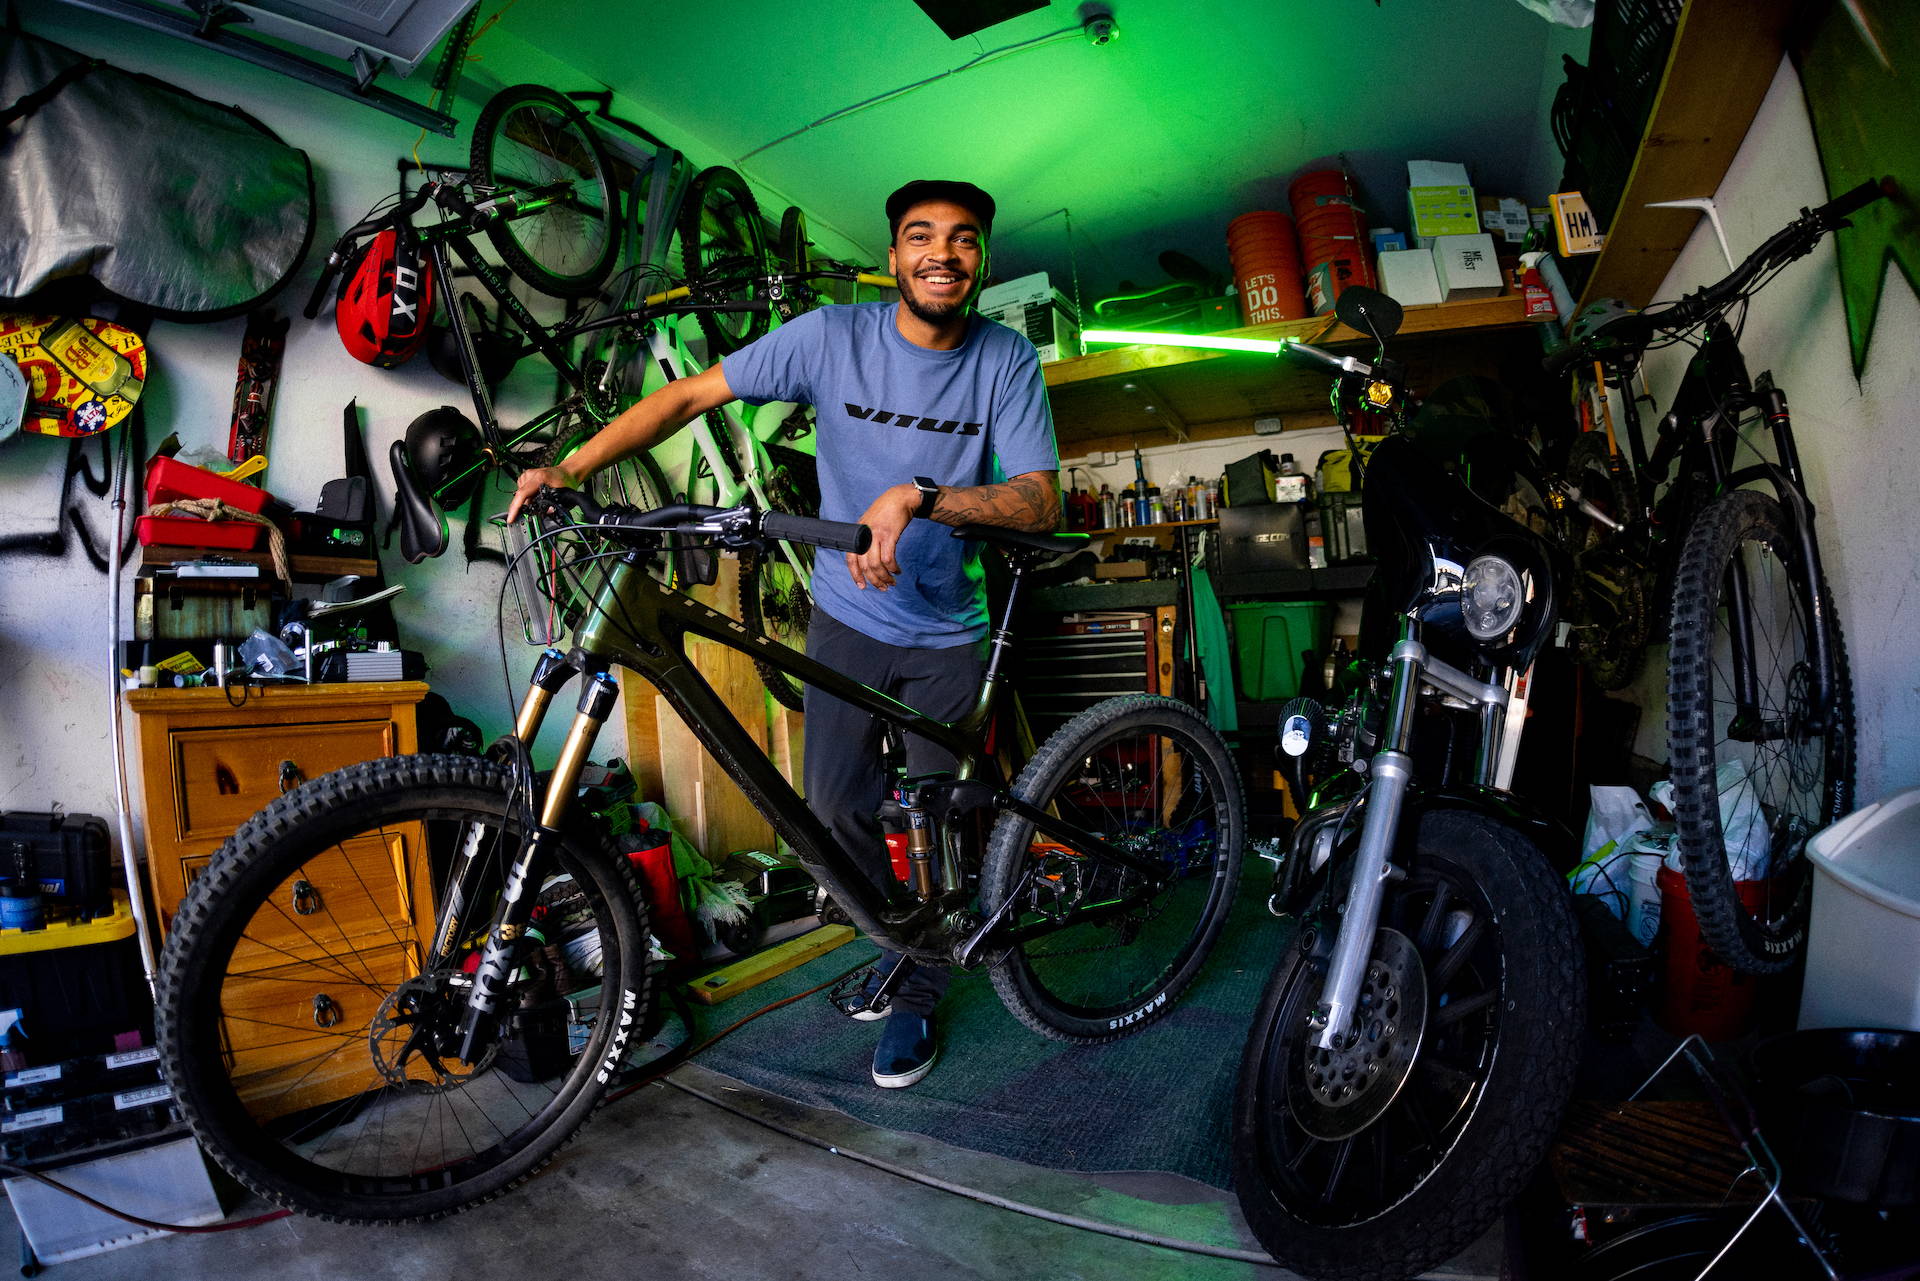 Vitus Real Rider Sami Gowdy with his collection of bikes.